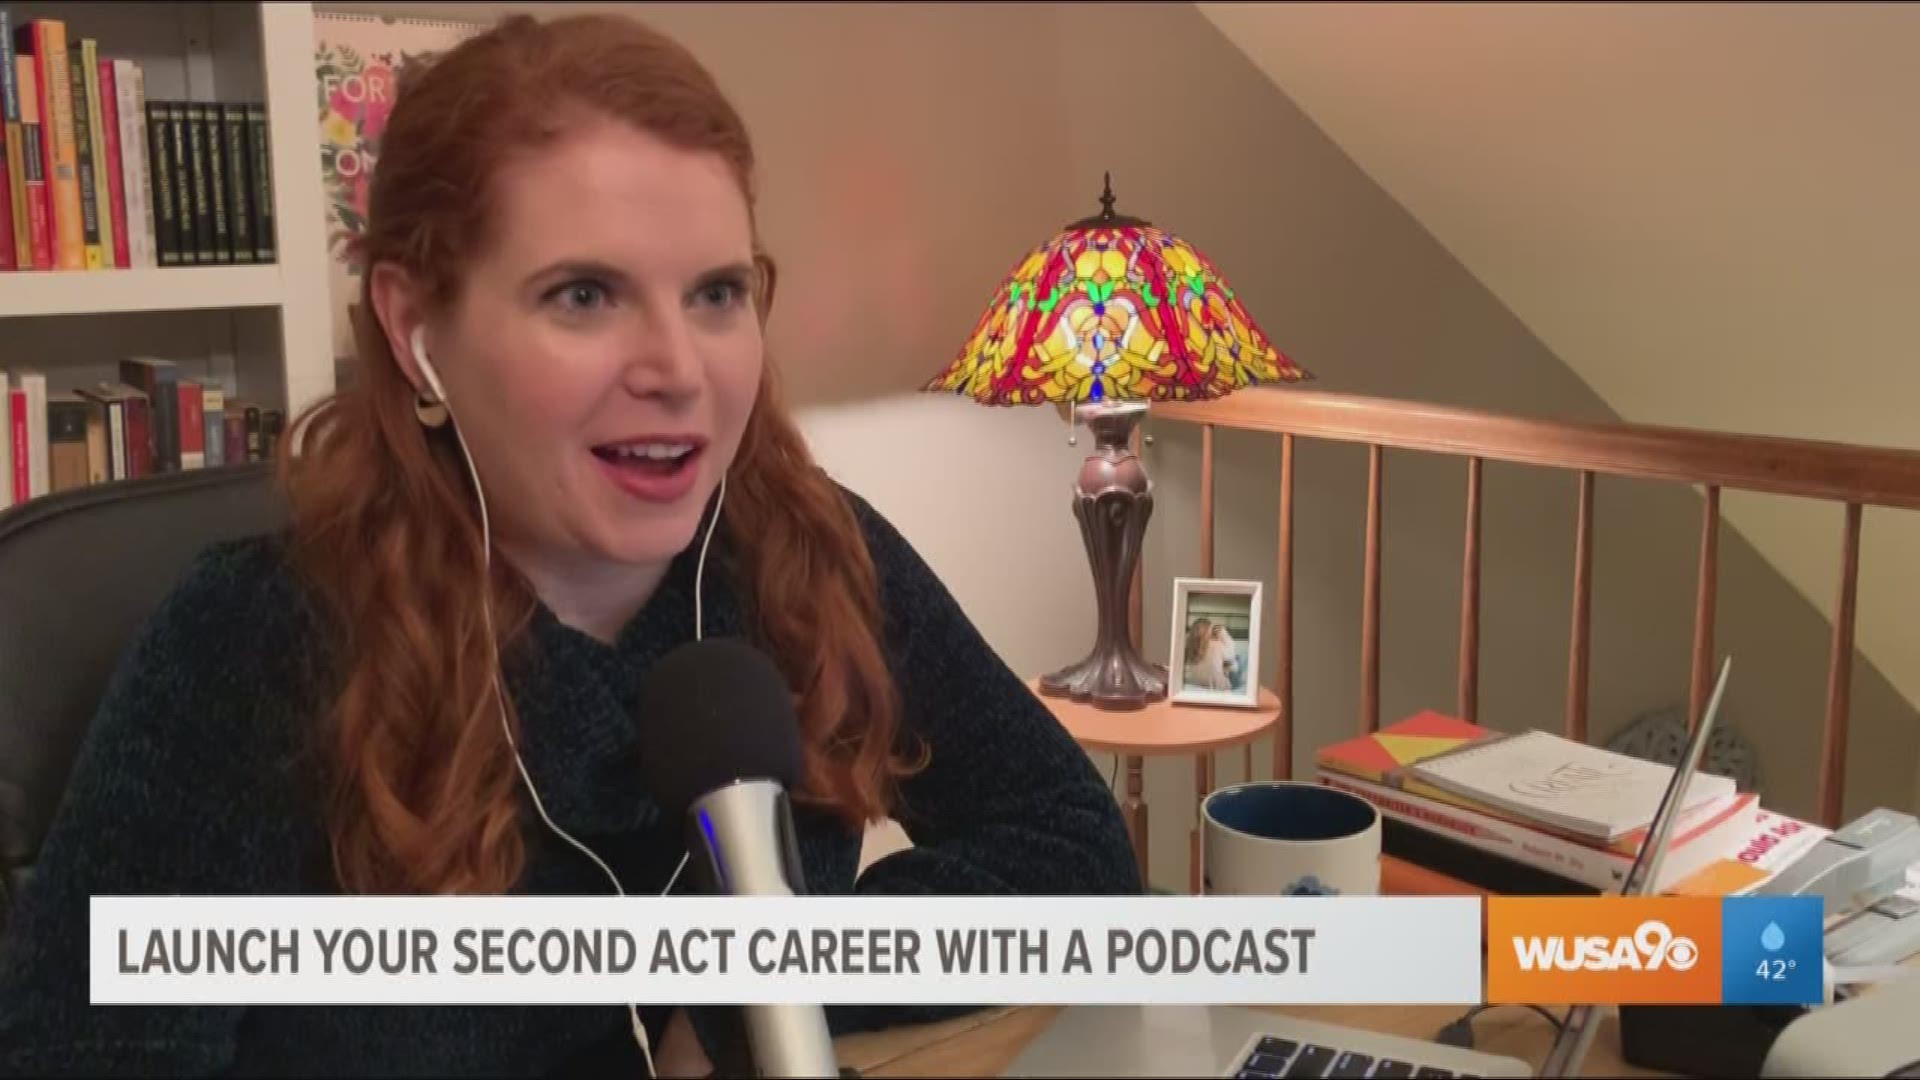 Podcast host and Washington Post contributor Hilary Sutton explains how a podcast can be a tool for business growth or used as a second career.